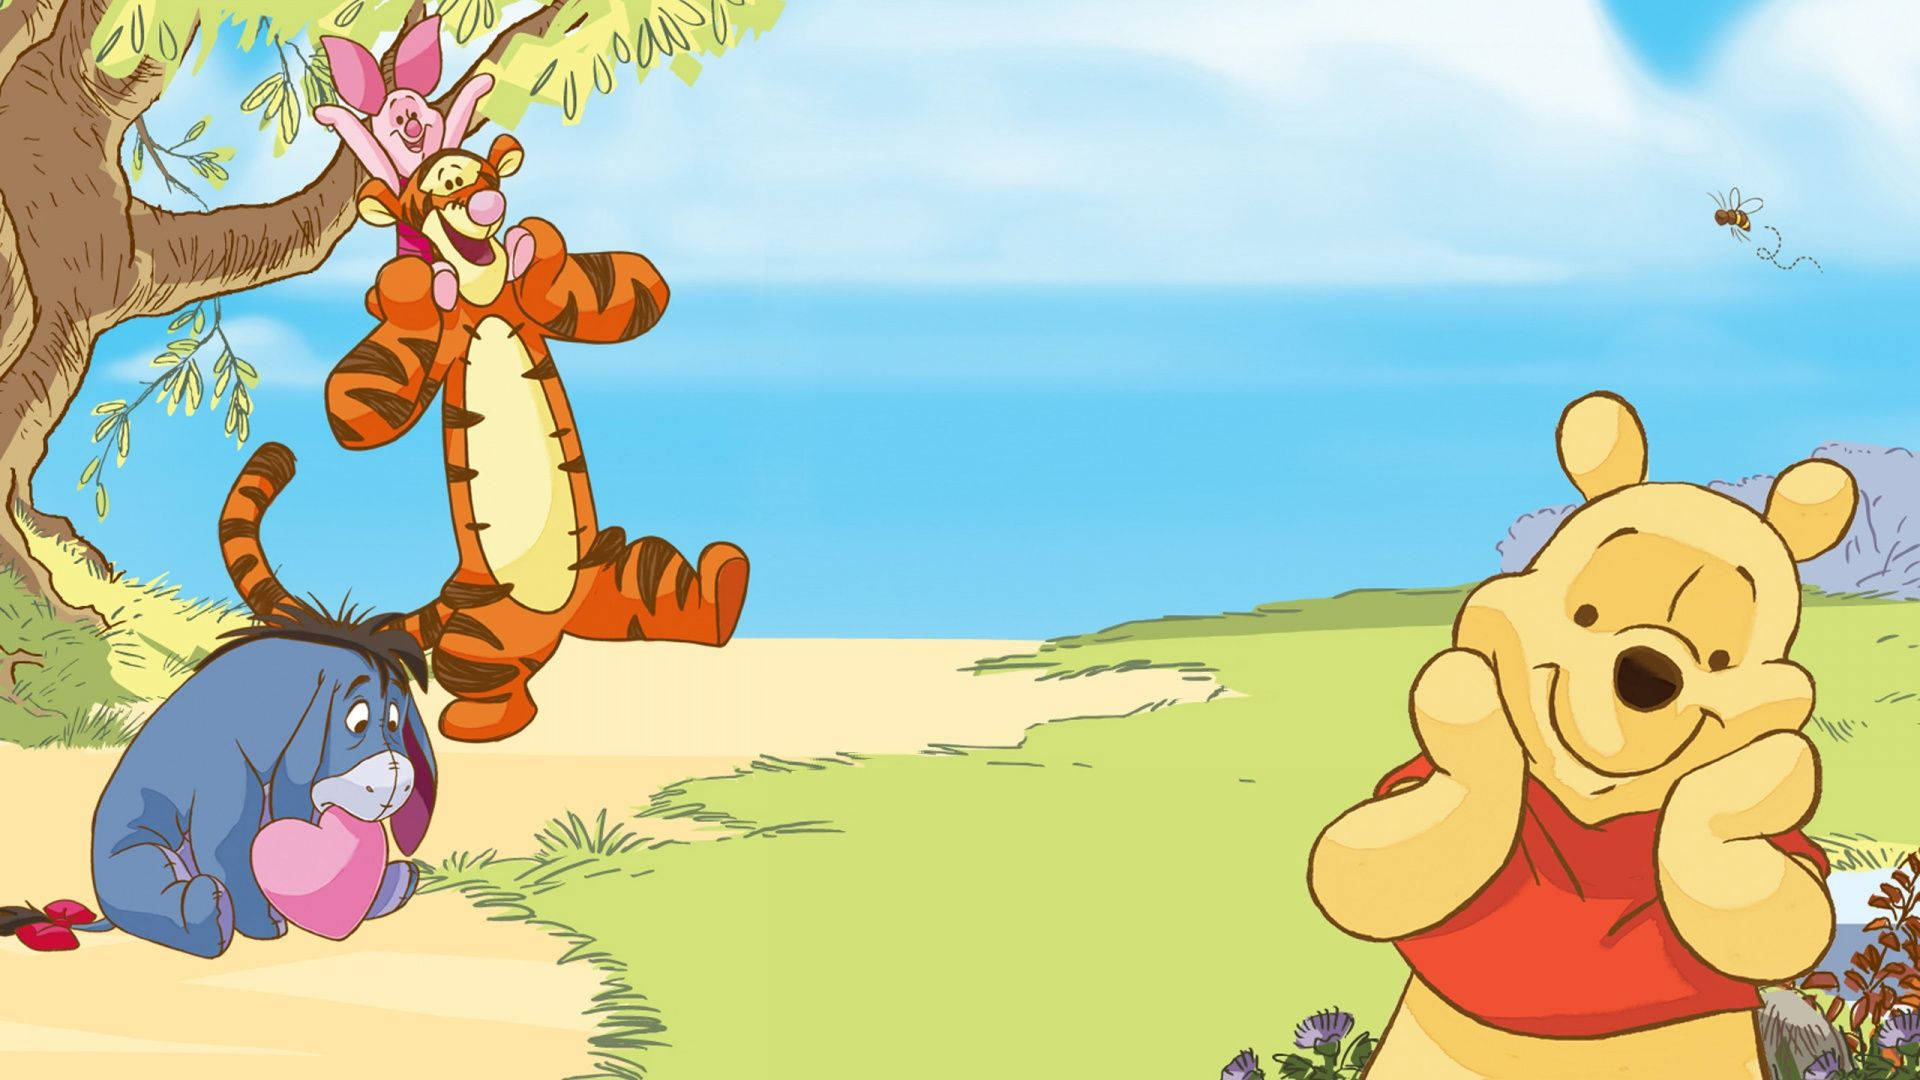 Disney 1920x1080 Hd Winnie The Pooh Characters In Woods Background